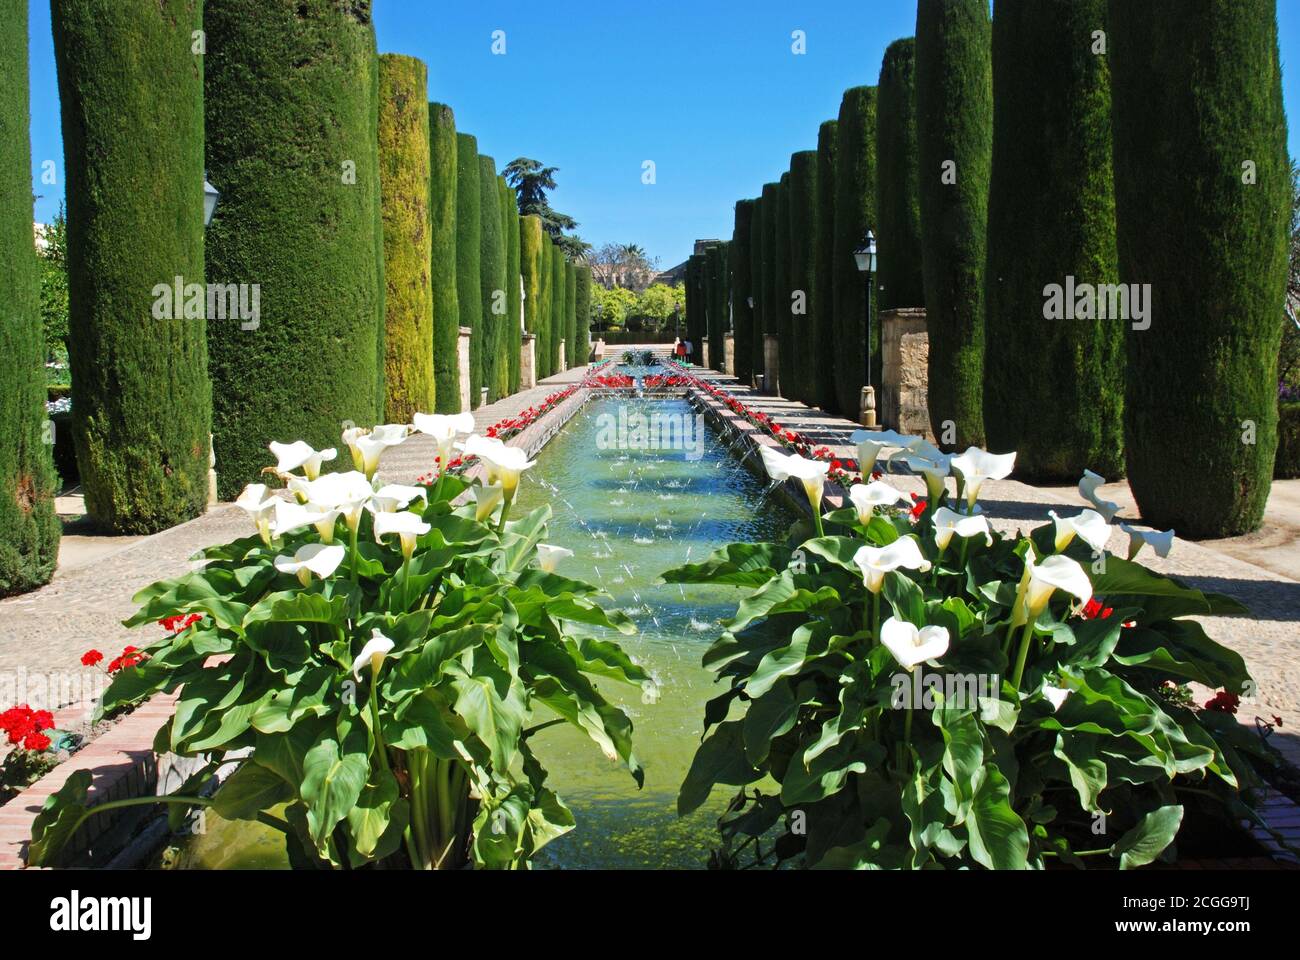 Water garden at the Palace Fortress of the Christian Kings (Alcazar de los Reyes Cristianos), Cordoba, Cordoba Province, Andalucia, Spain, Europe. Stock Photo